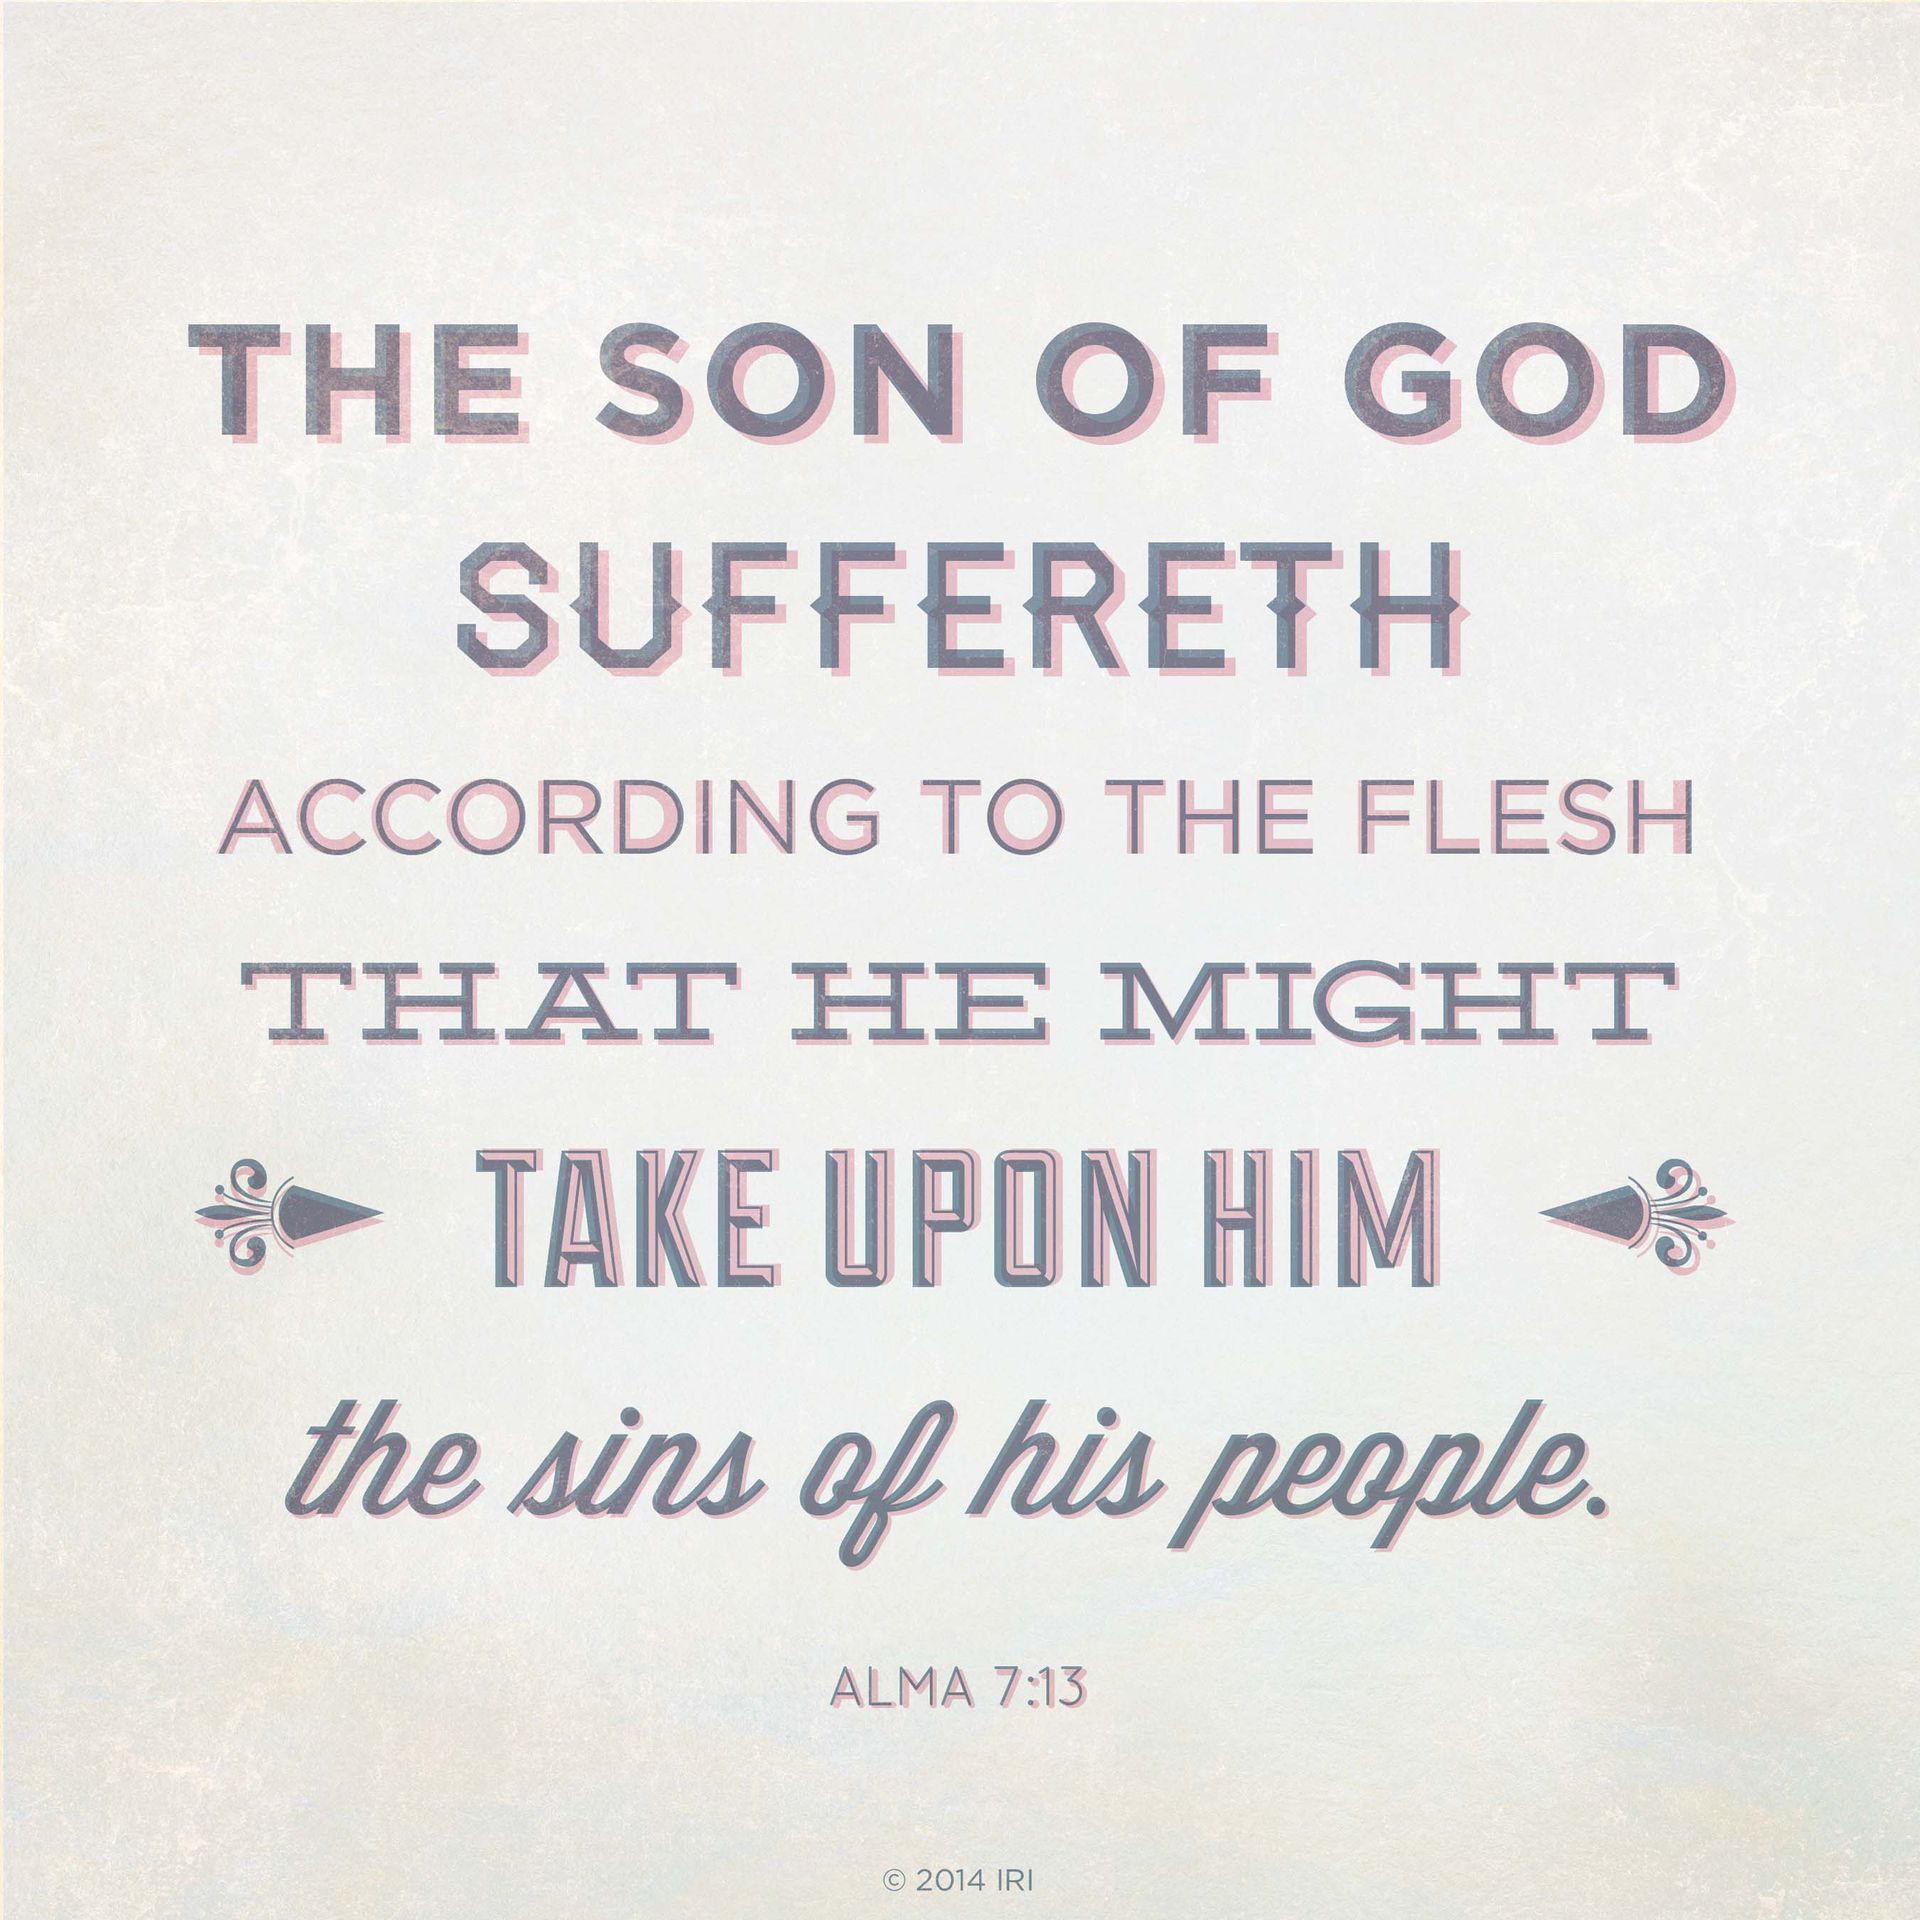 “The Son of God suffereth according to the flesh that he might take upon him the sins of his people.”—Alma 7:13